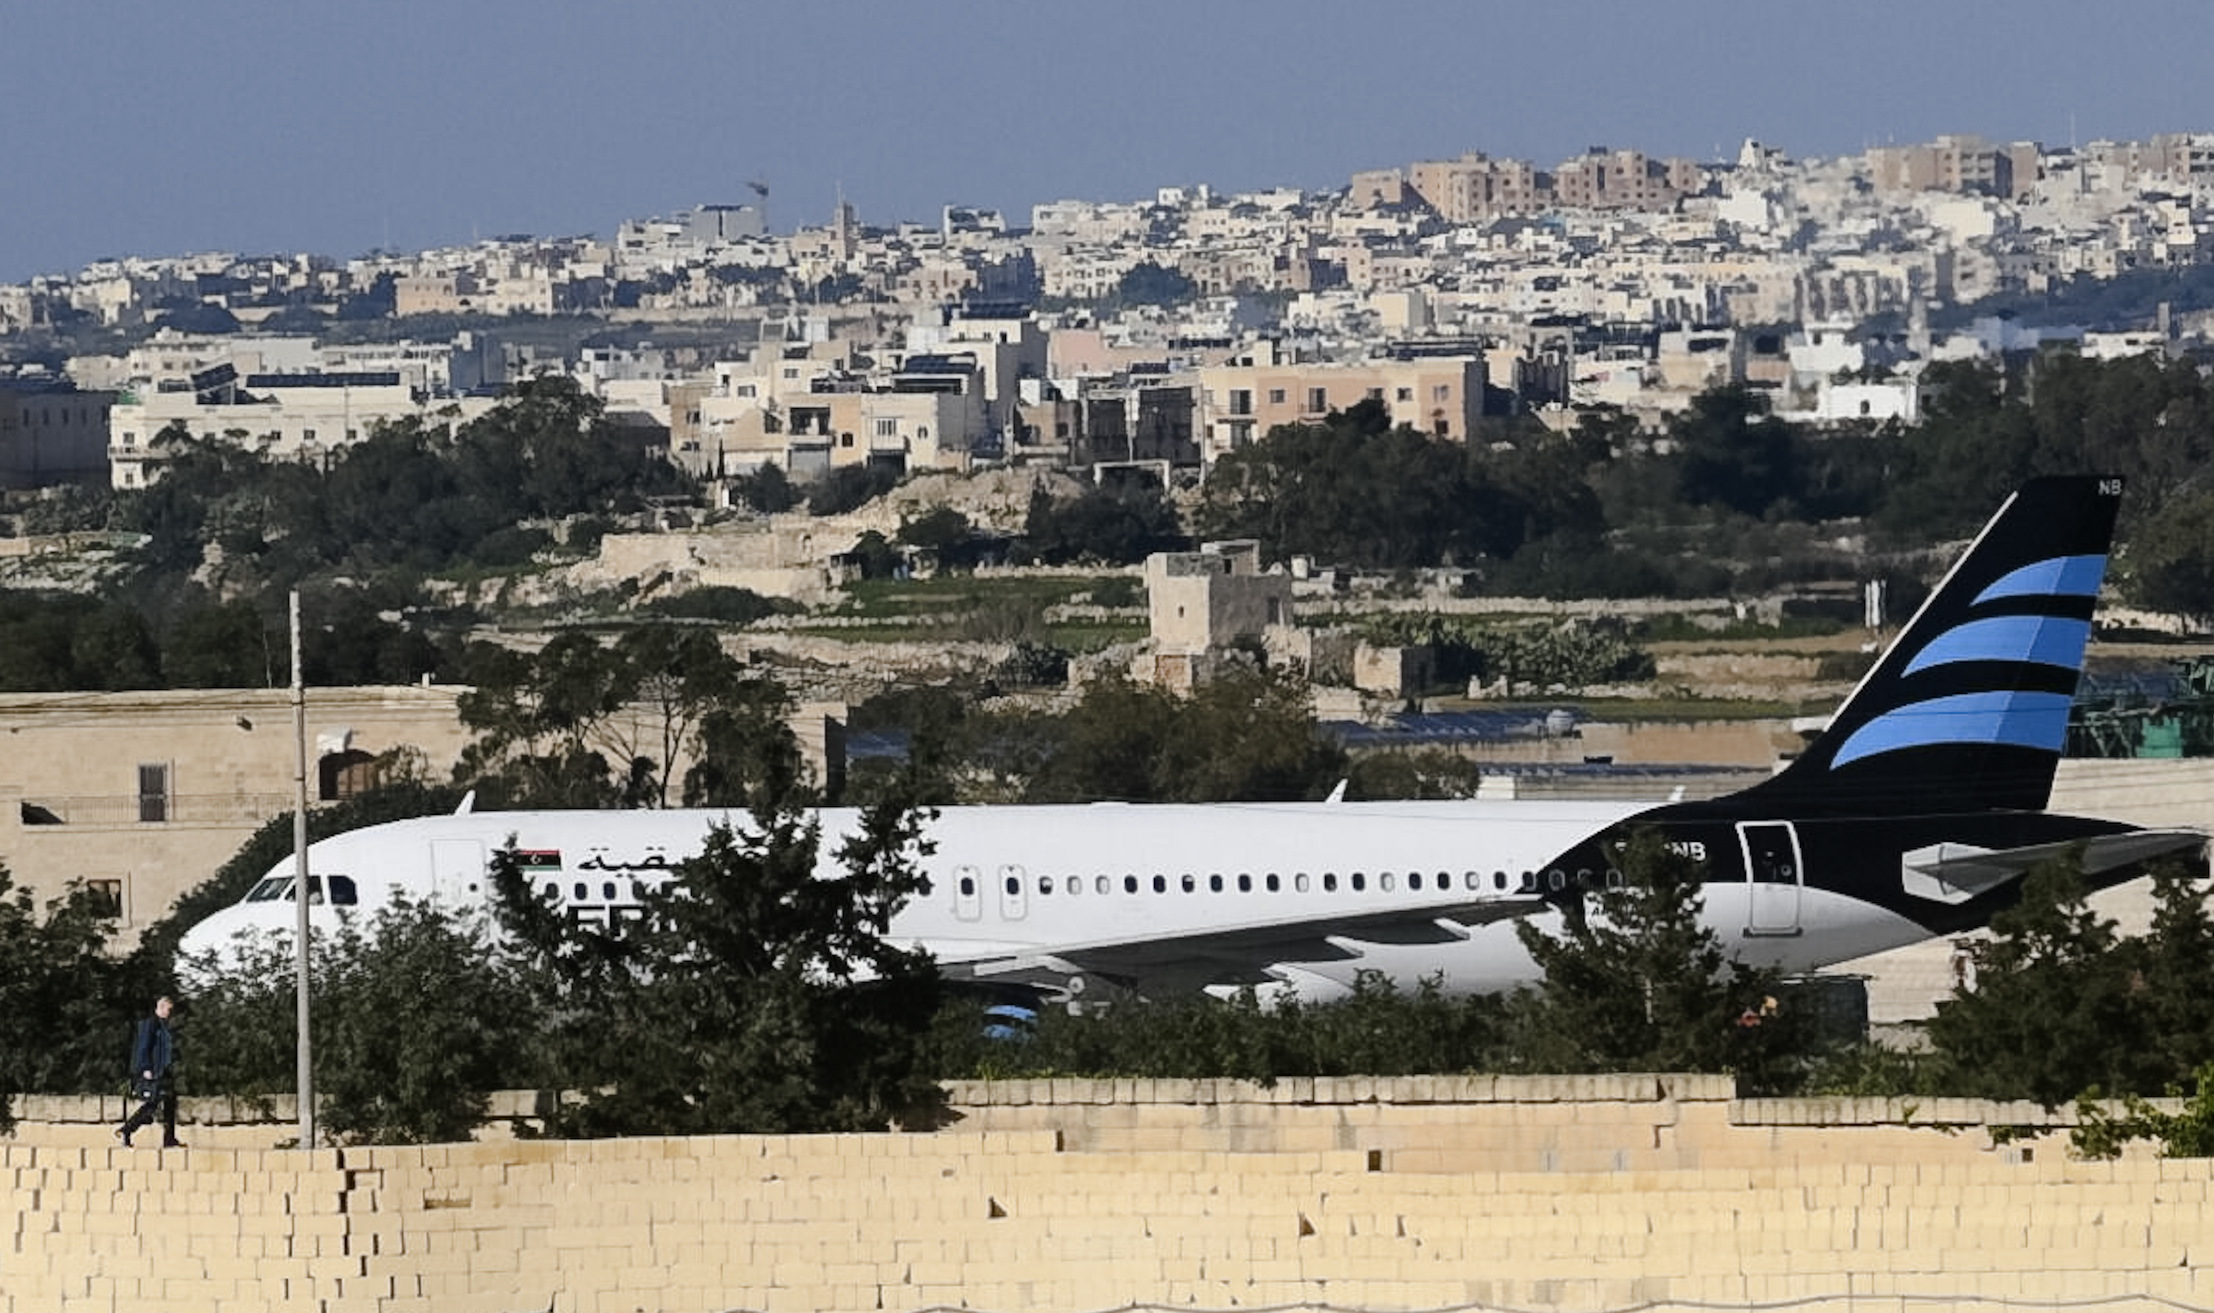 An Afriqiyah Airways plane from Libya stands on the tarmac at Malta's Luqa International airport, Friday, Dec. 23, 2016. Two hijackers diverted a Libyan commercial plane to Malta on Friday and threatened to blow it up with hand grenades, Maltese authorities and state media said.  (AP Photo/Jonathan Borg)